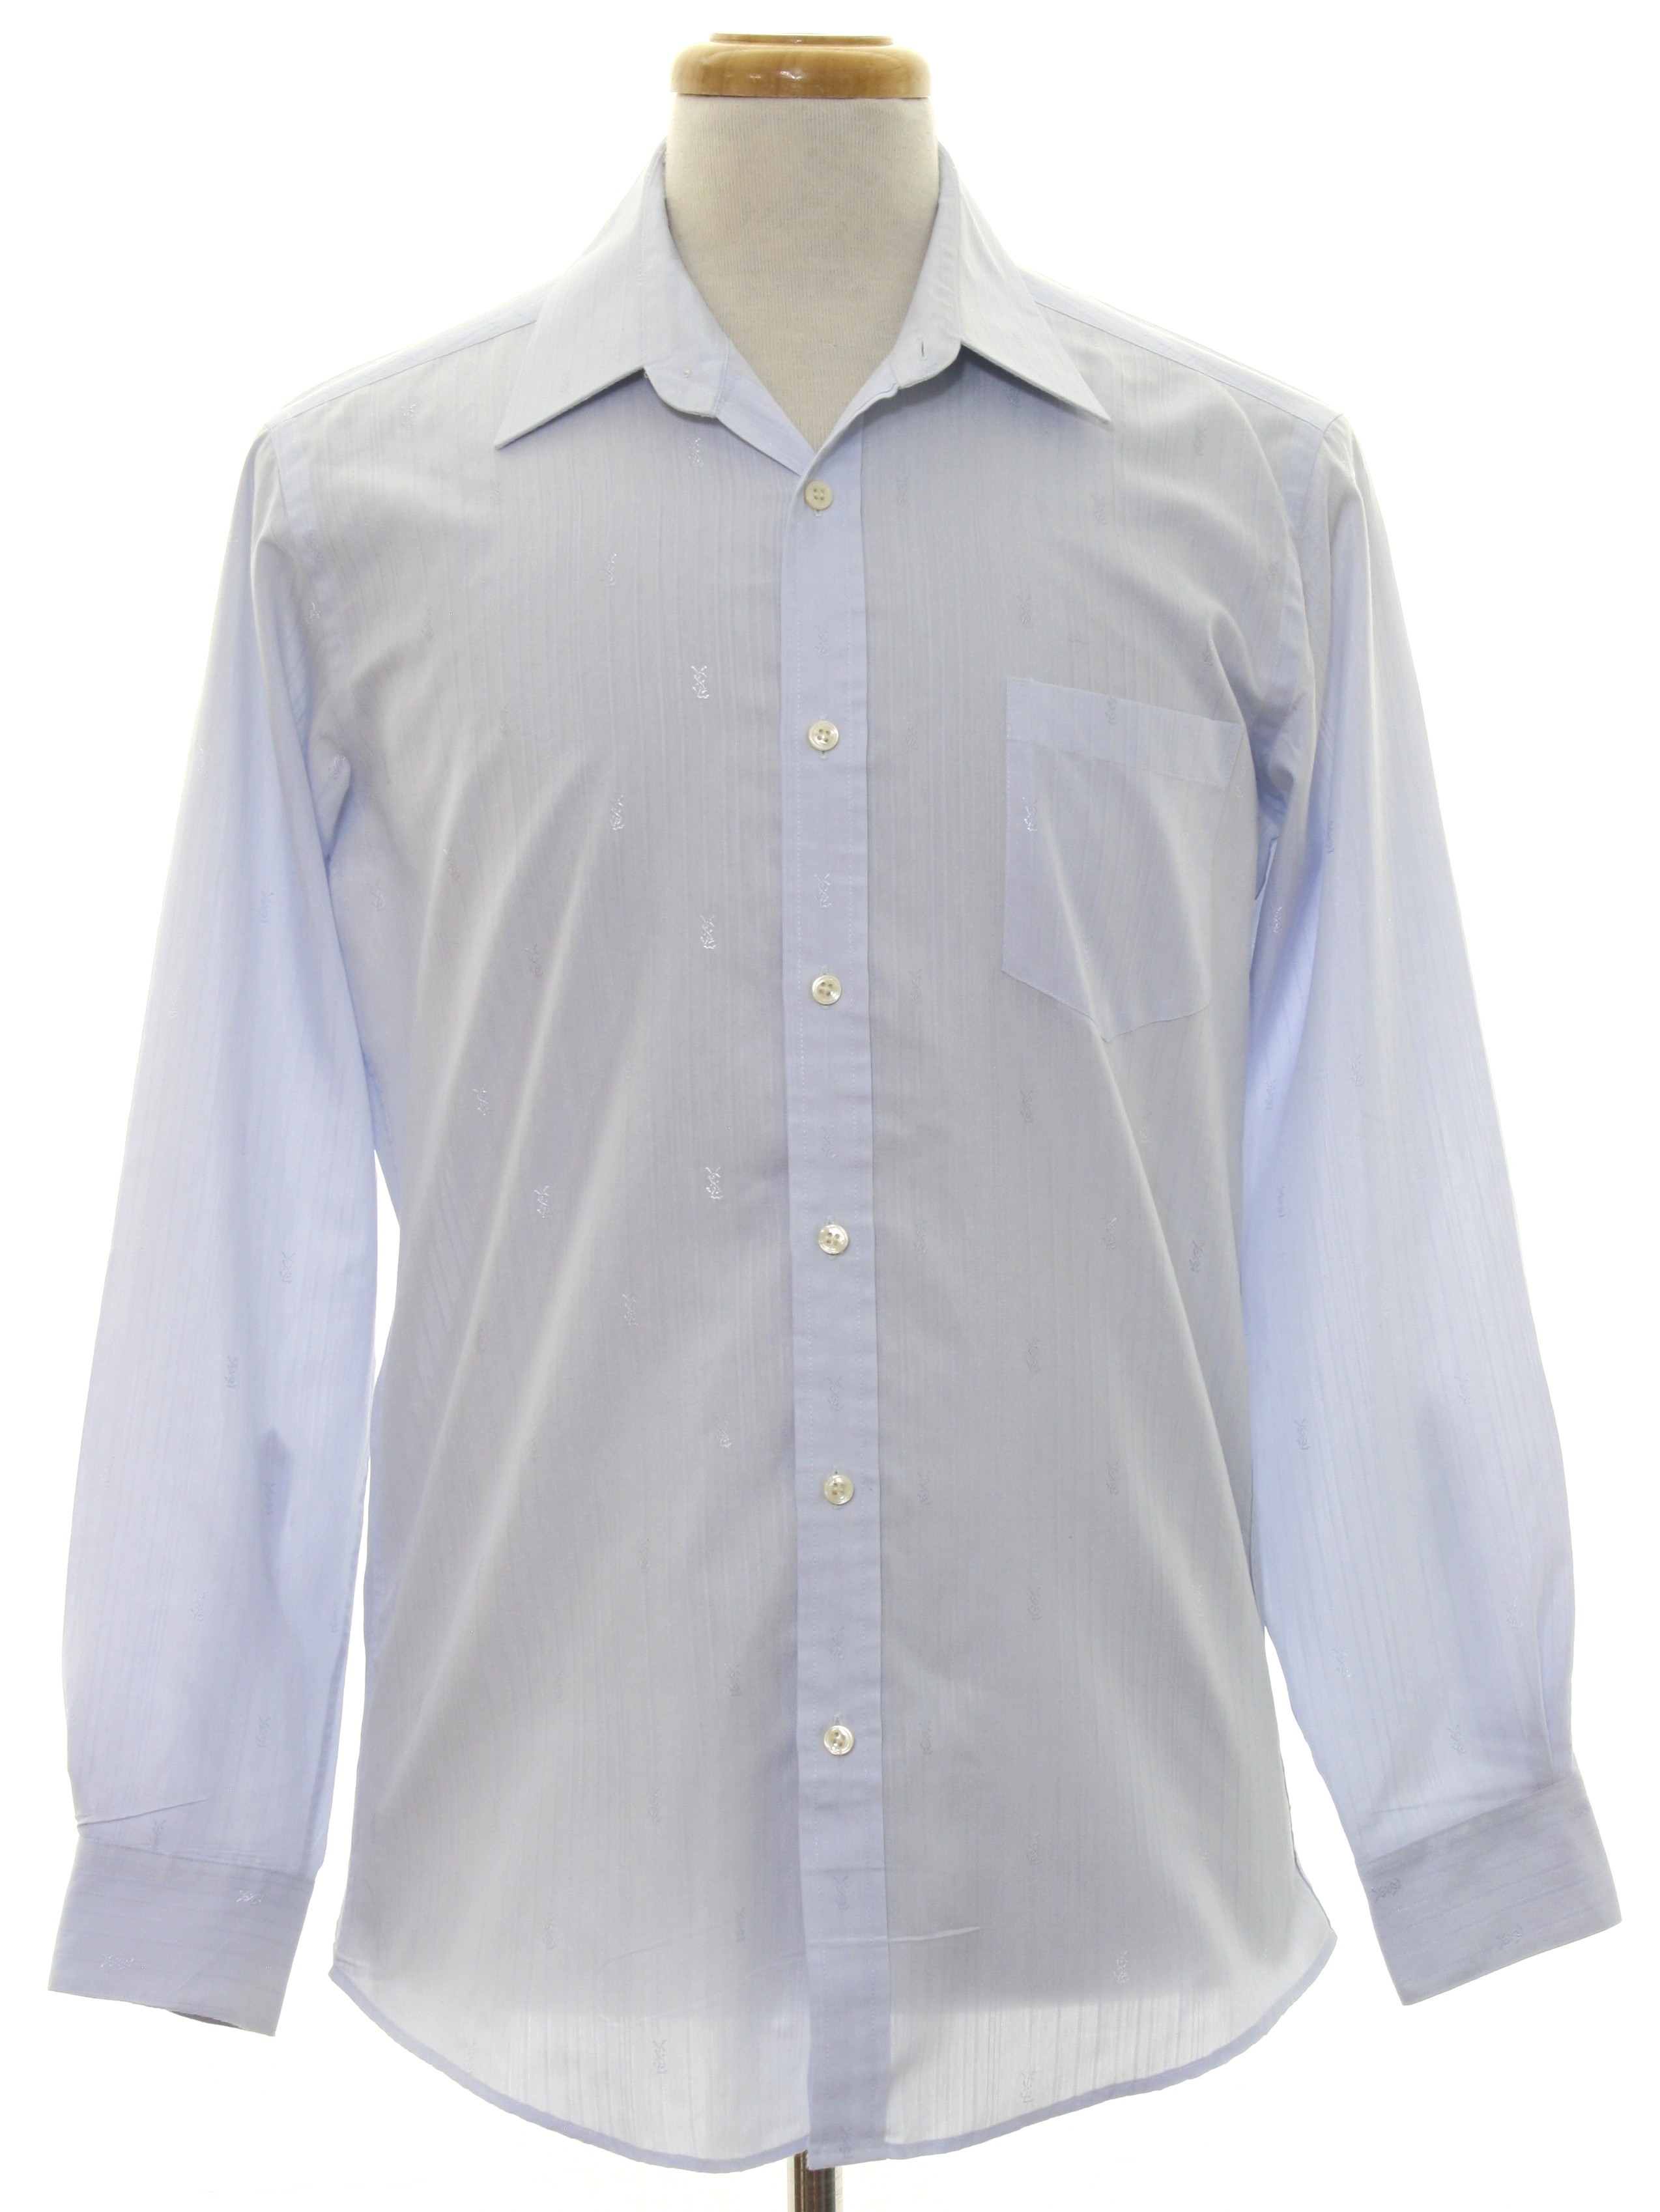 Yves Saint Laurent Eighties Vintage Shirt: Late 80s or early 90s -Yves ...